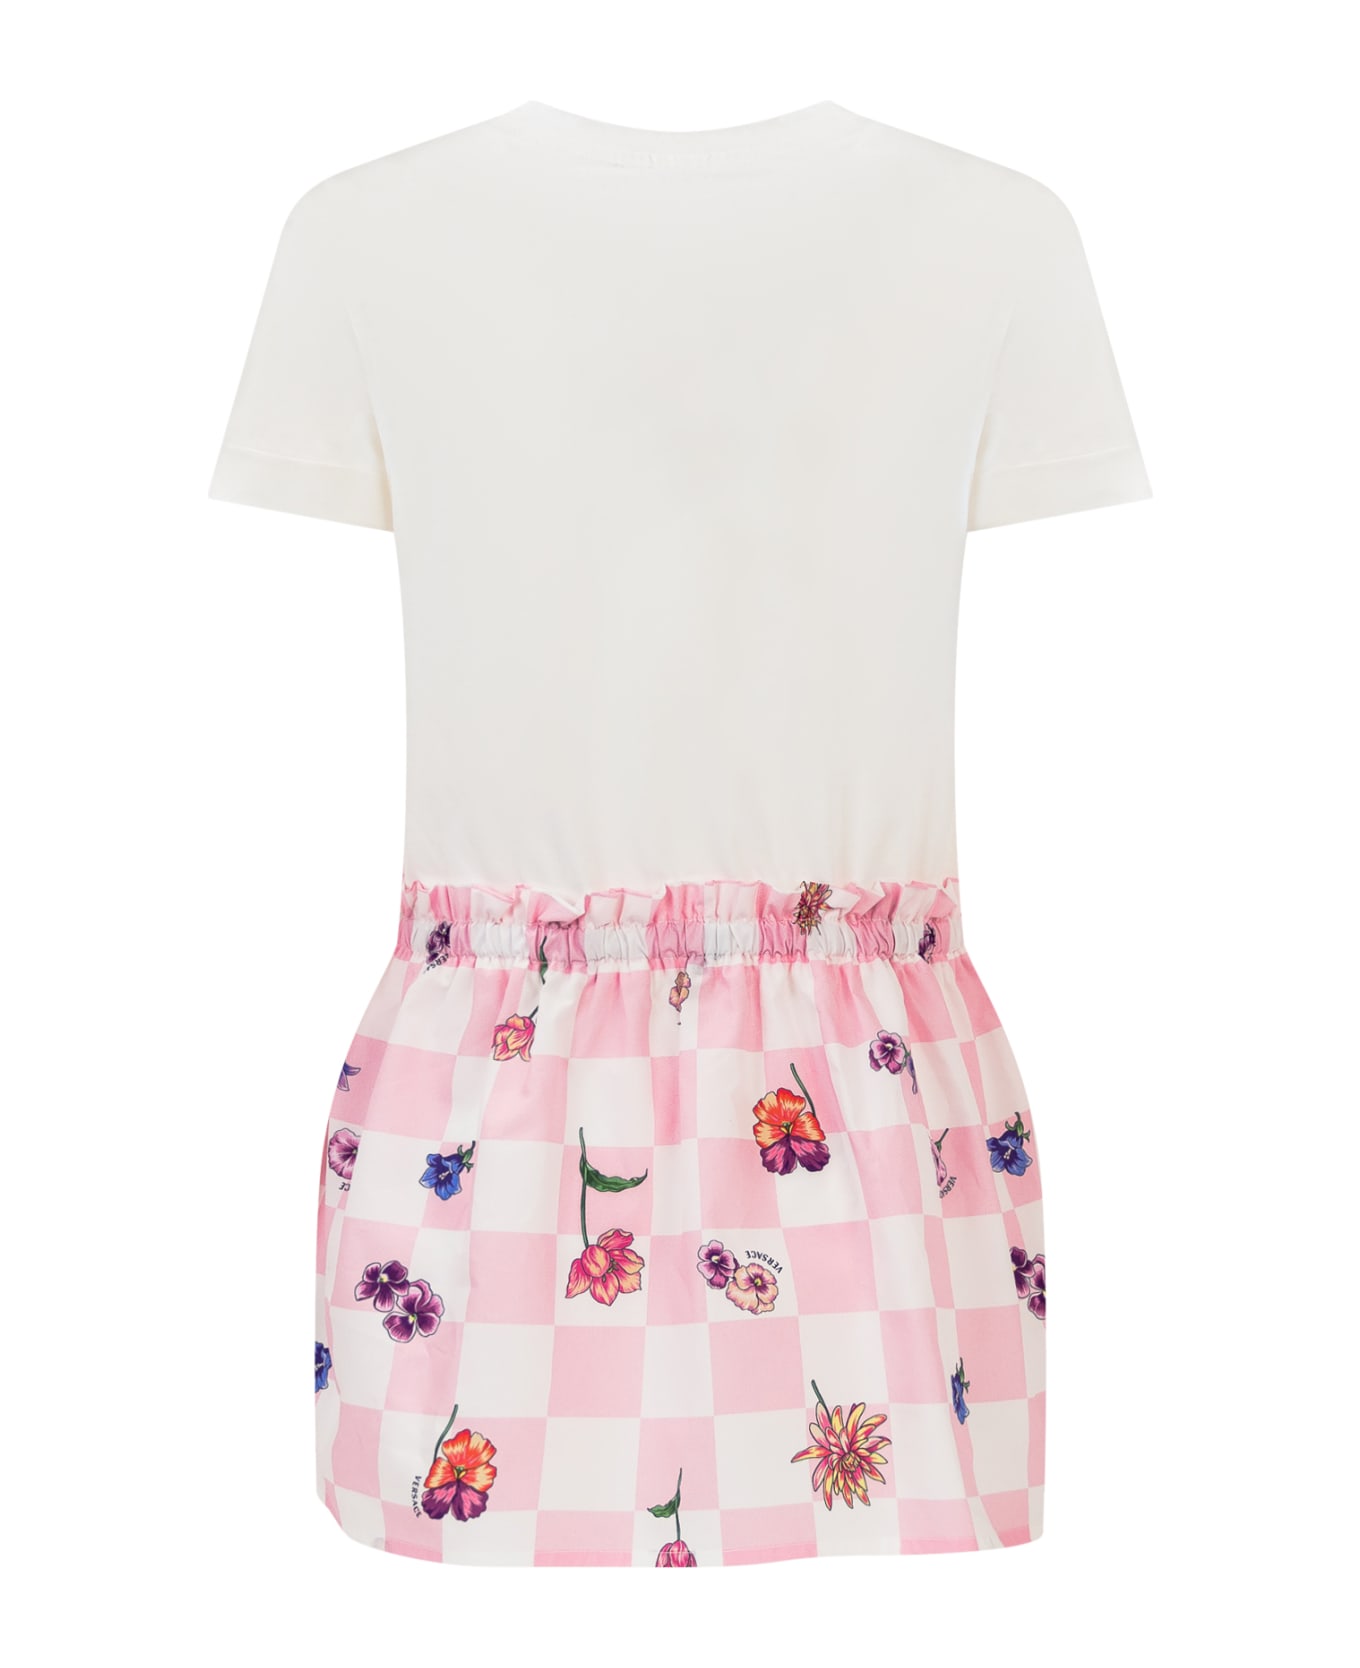 Young Versace Blossom Dress - BIANCO-ROSA-ROSA BABY